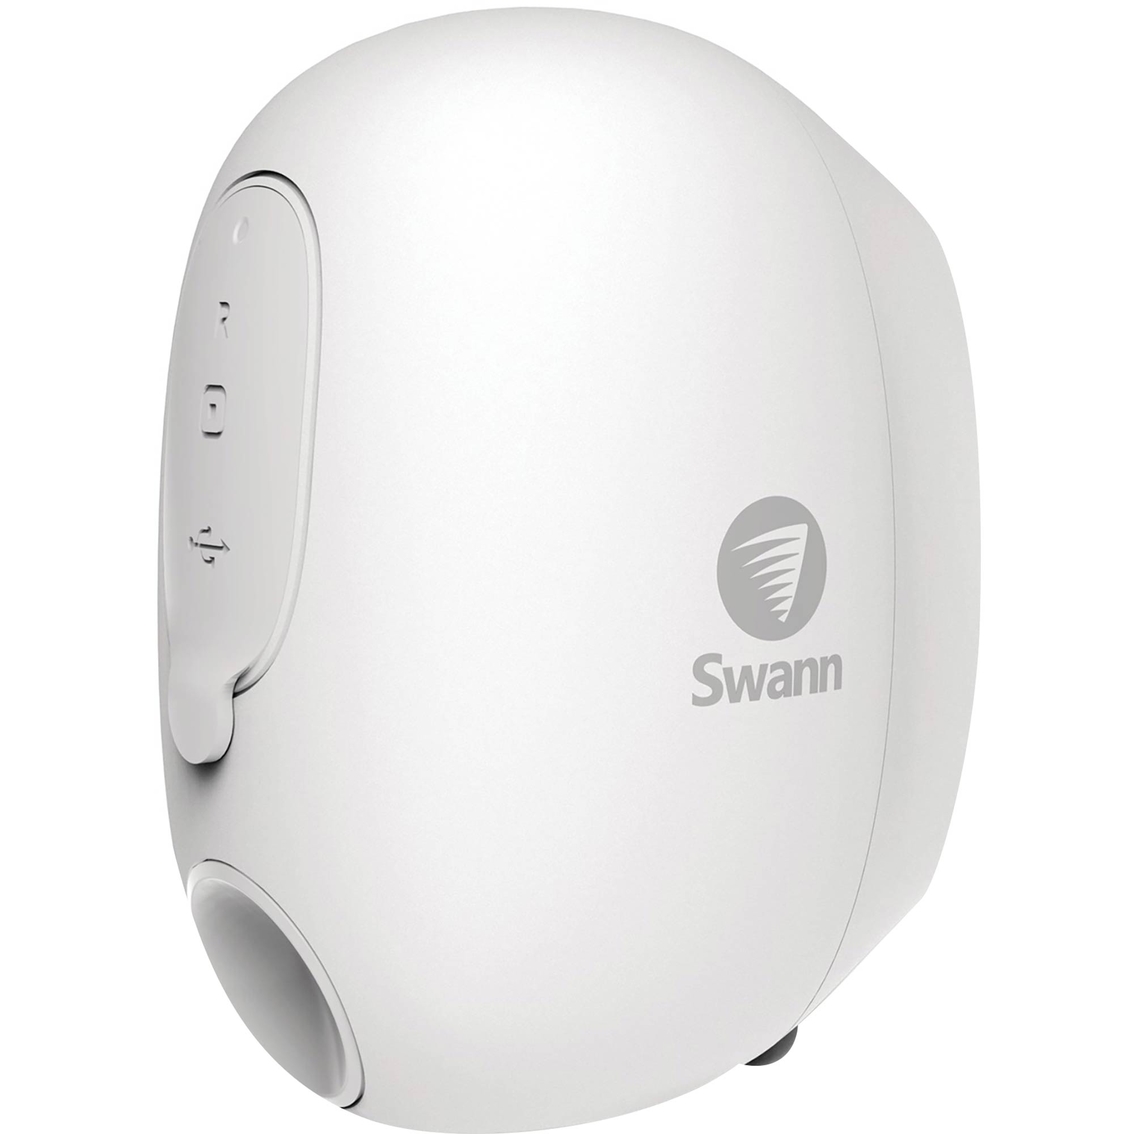 Swann 1080p Full HD Battery-Powered Wire-Free Camera 2pk. - Image 3 of 4